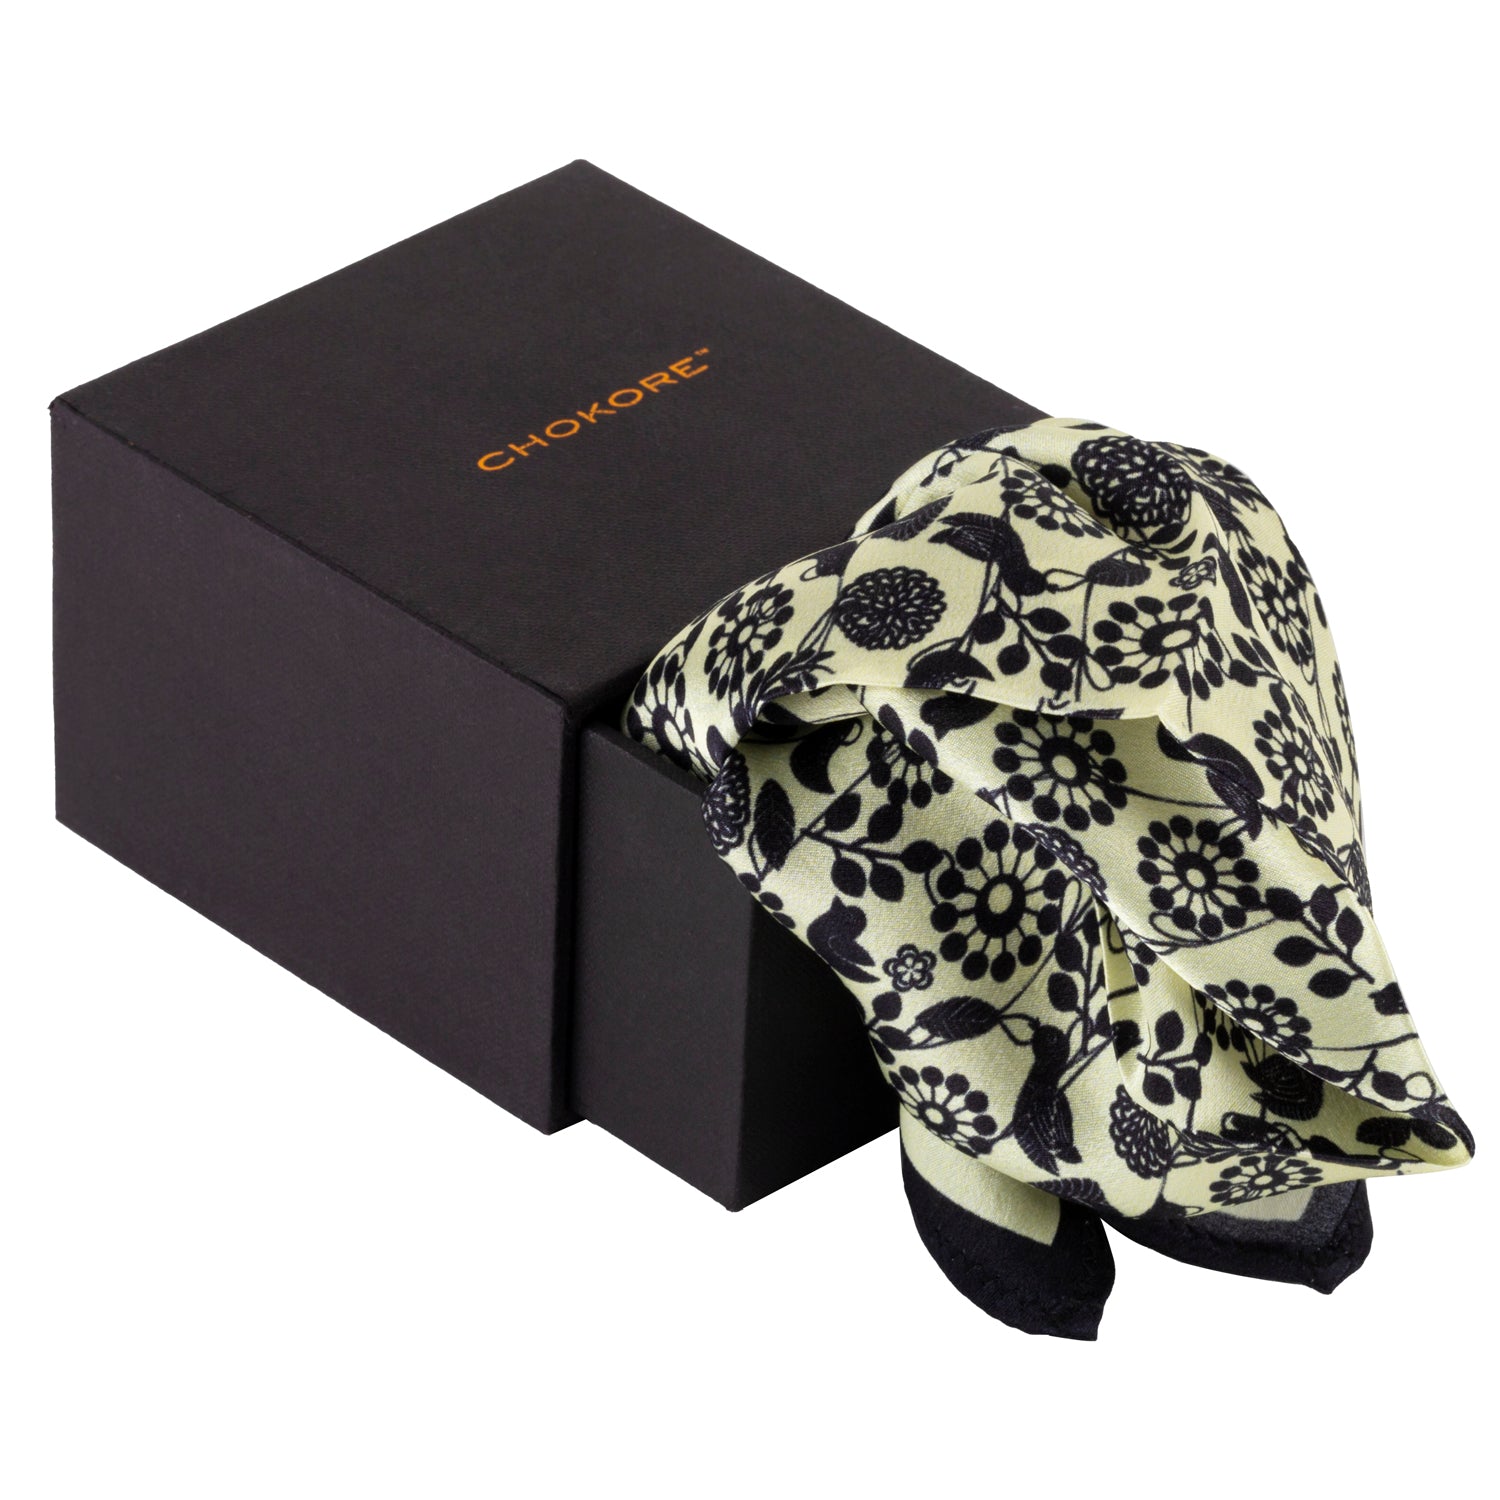 Chokore Black and White Satin Silk pocket square from the Wildlife Collection